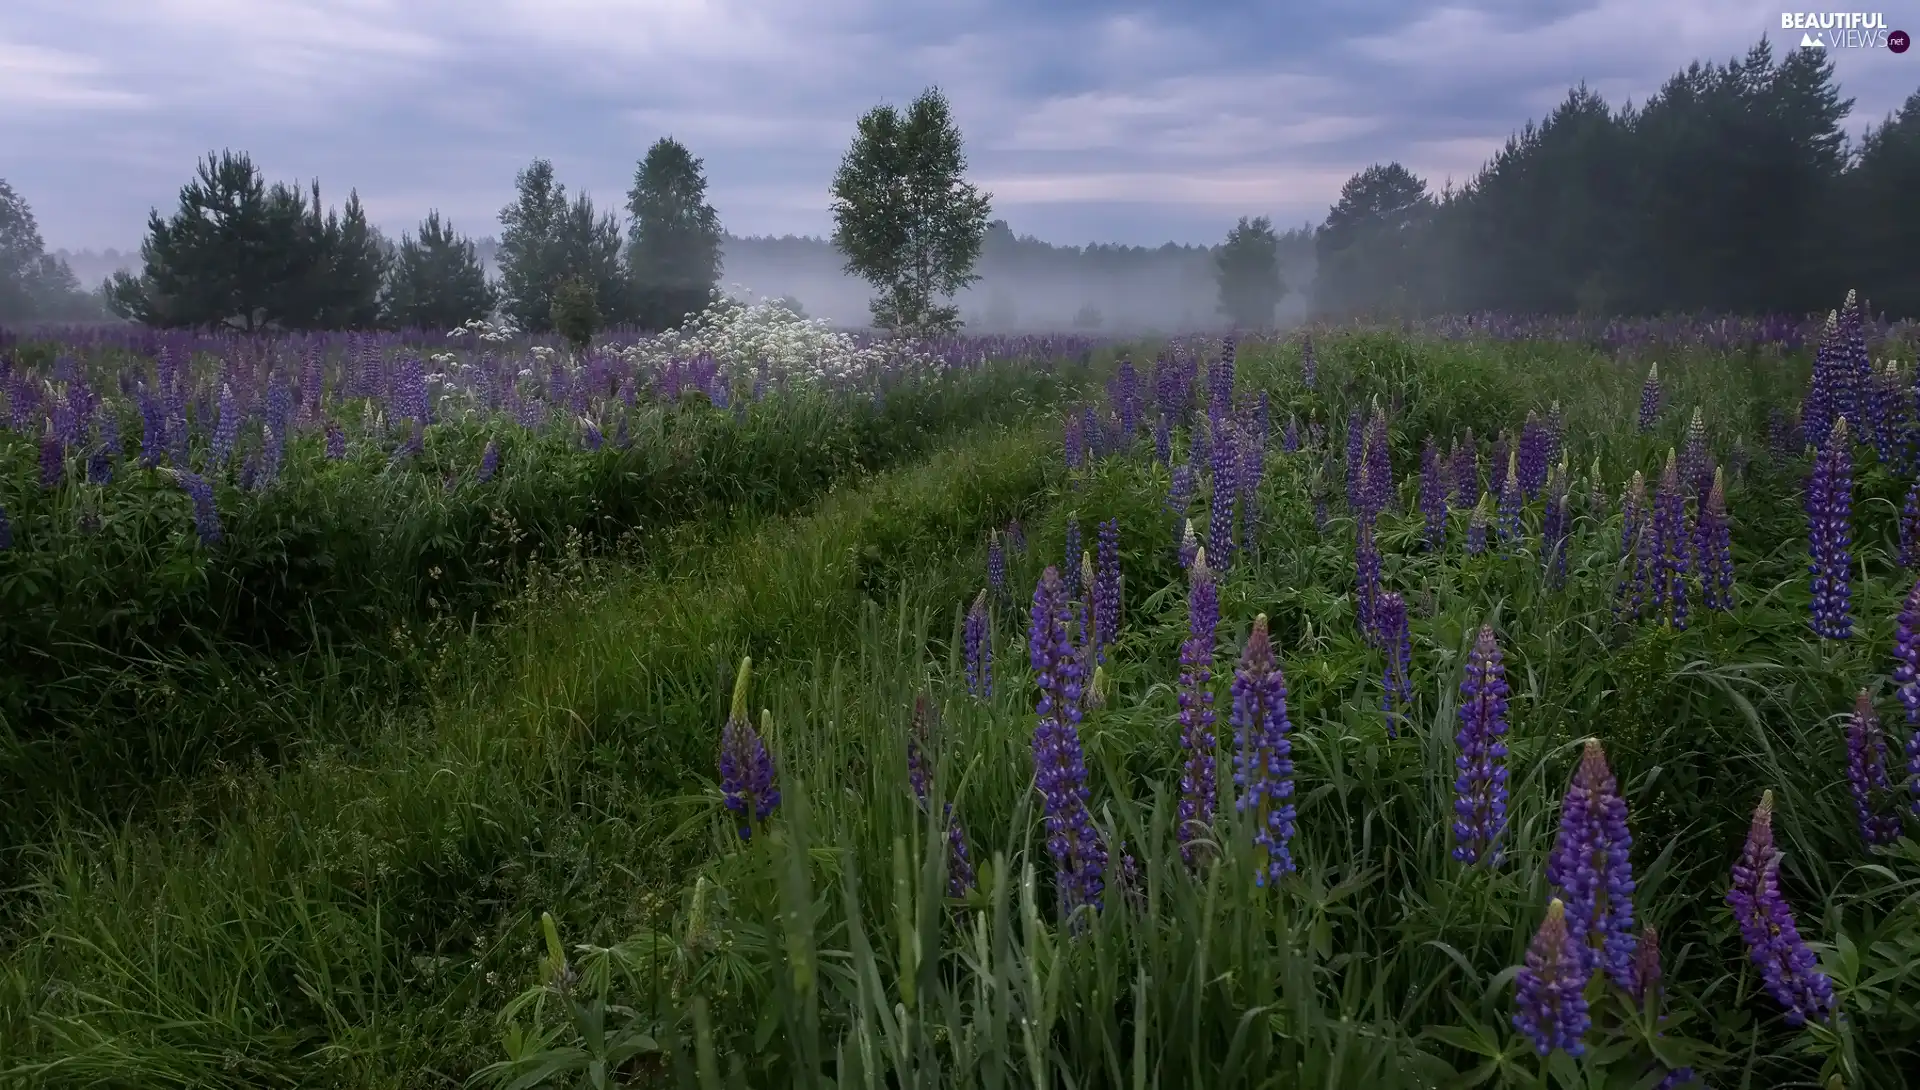 grass, Flowers, viewes, lupine, Meadow, trees, Fog